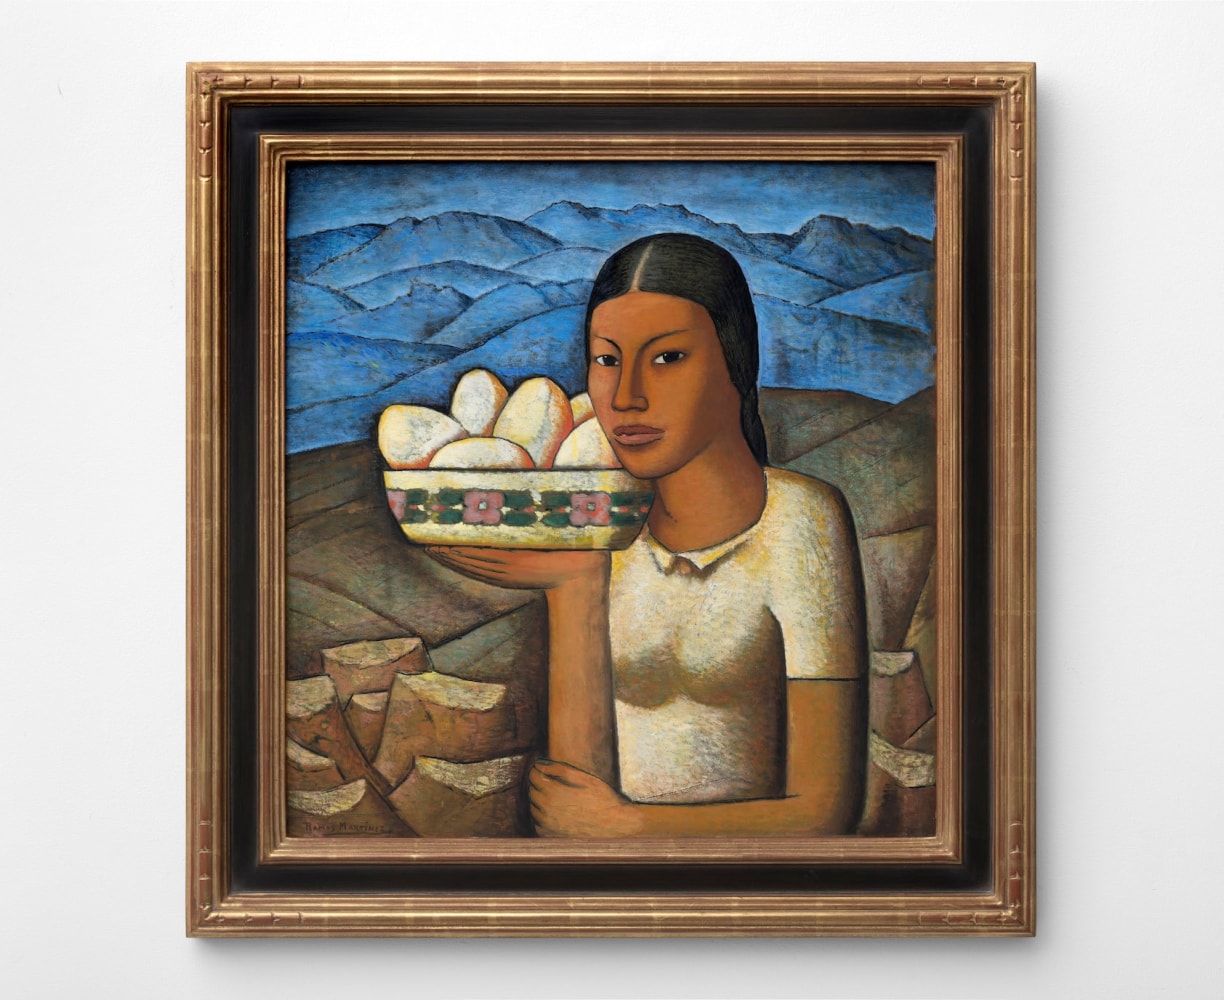 Alfredo Ramos Martínez (1871-1946) Mujer con Frutas, c. 1934  tempera and India ink on board 24 3/4 x 23 5/8 inches;  62.9 x 60 centimeters LSFA# 15353